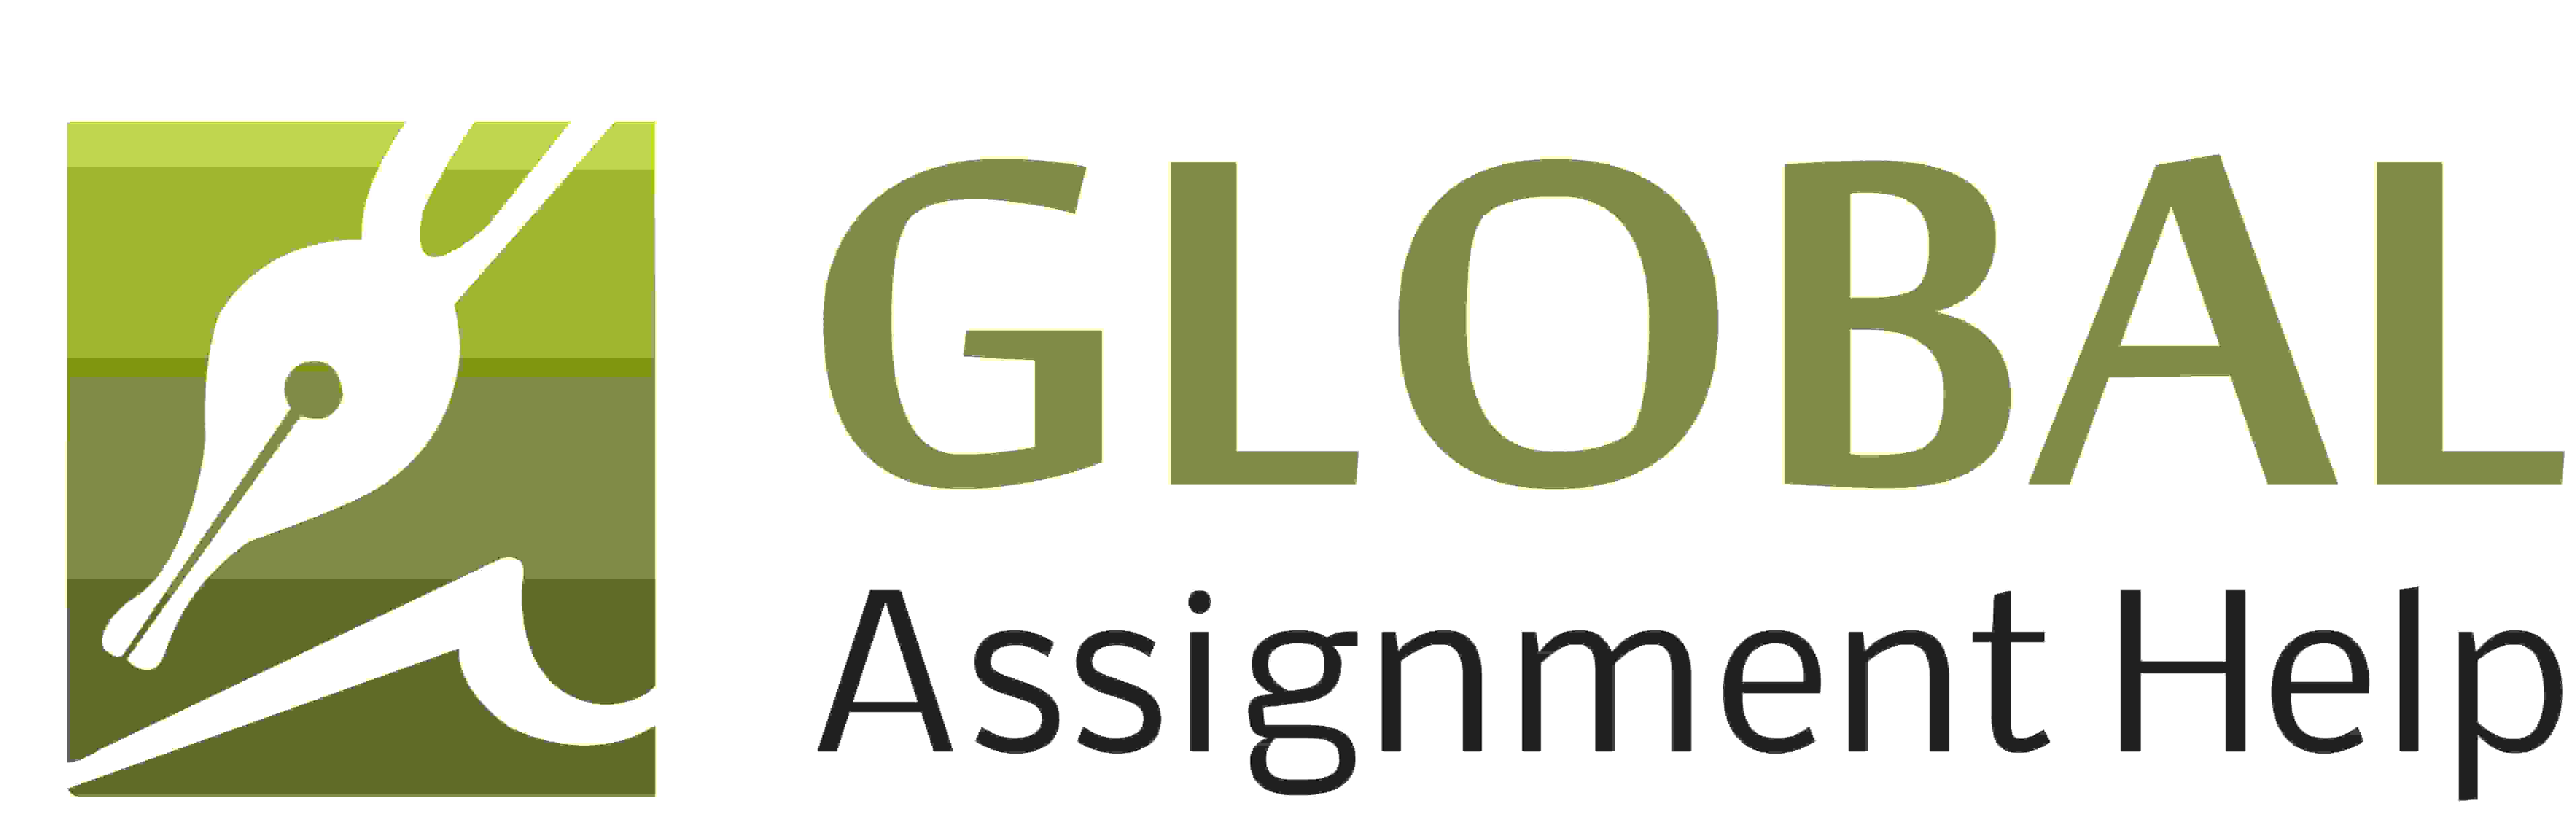 Attachment globalassignment_logo (1) (1).png